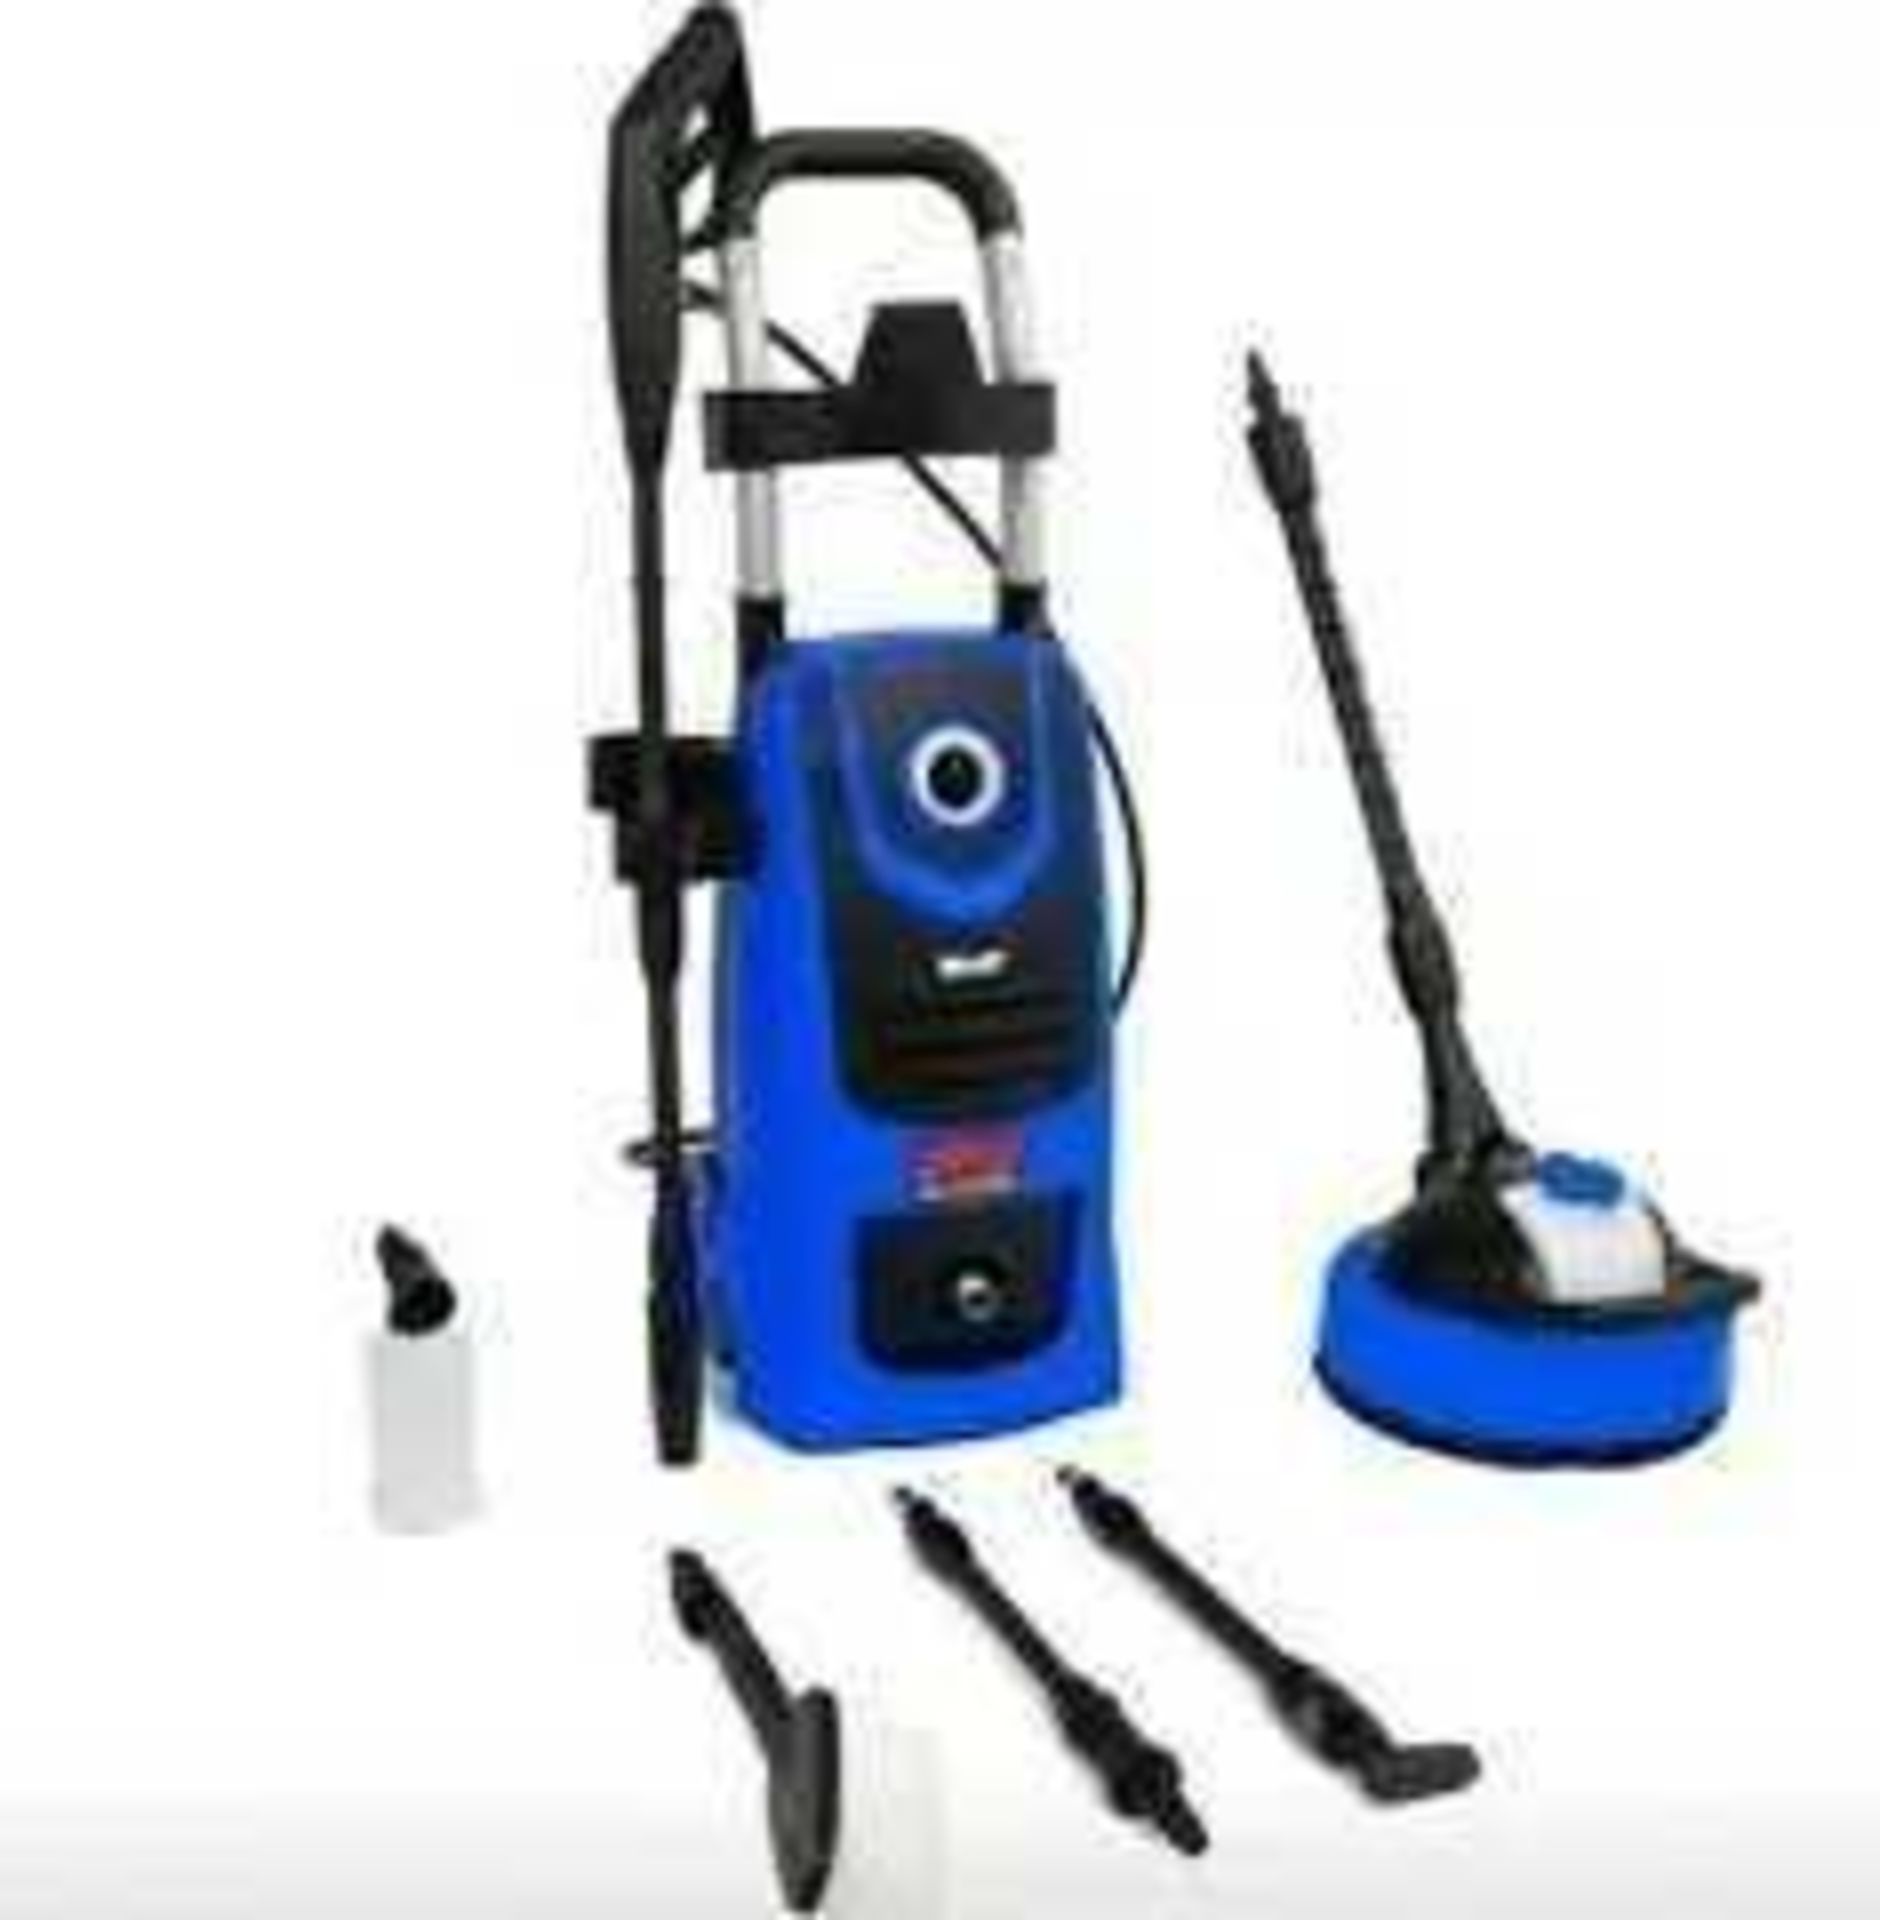 RRP £190 A Boxed Brand New Factory Sealed Wolf 140 Bar Super Blaster Pressure Washer With Outdoor &